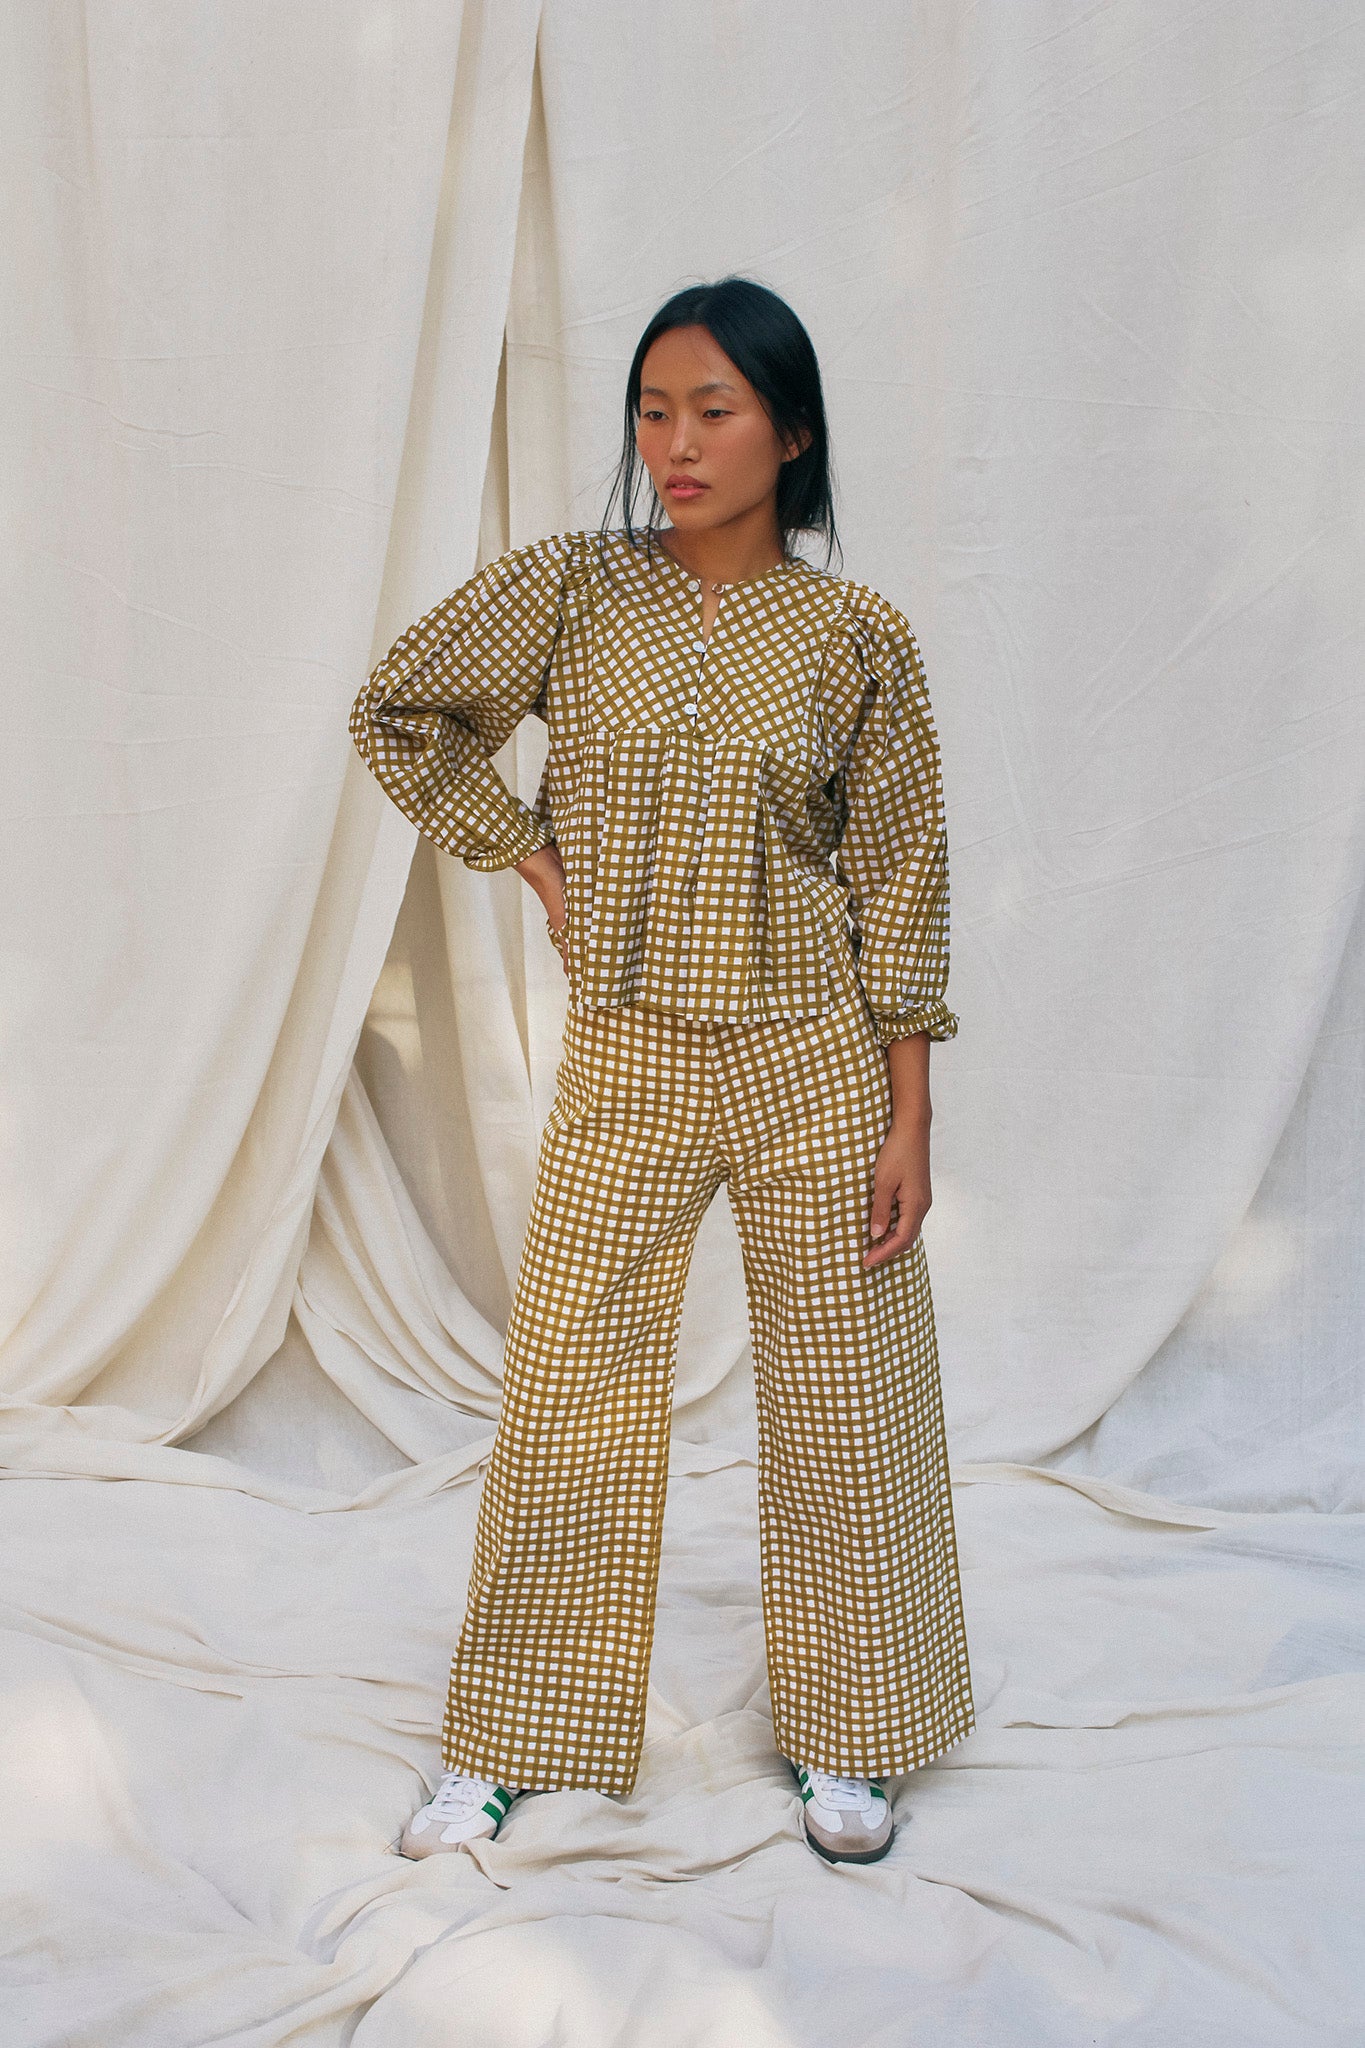 Camel Houndstooth Check Leggings, Trousers